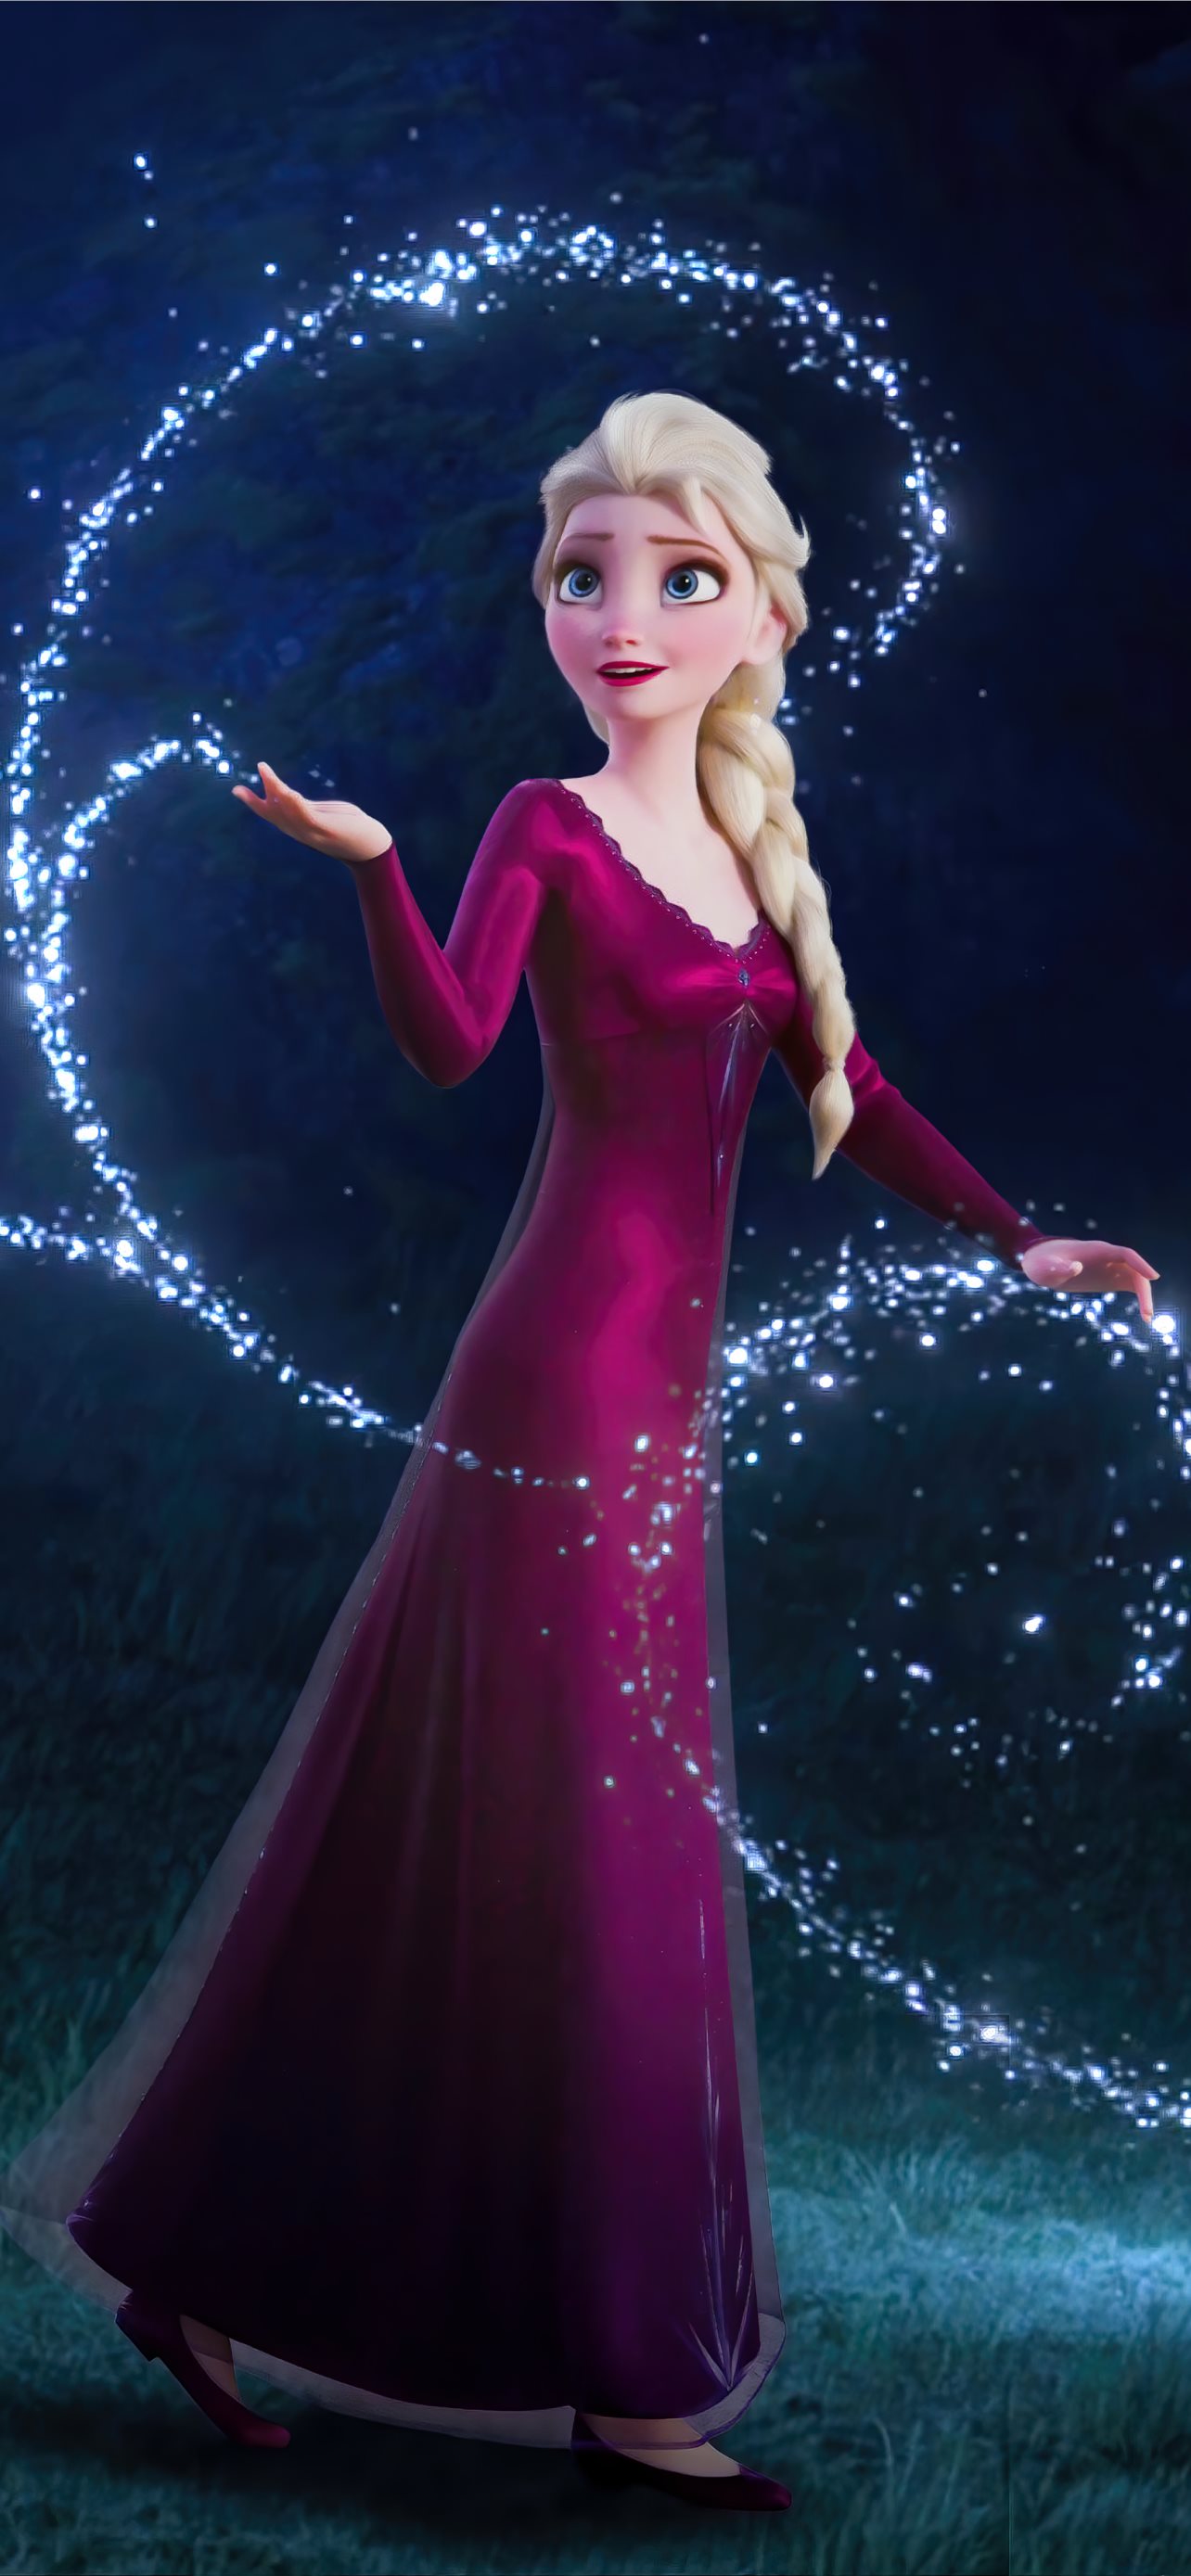 Queen Elsa with snowflakes and pink sky background 4K wallpaper download